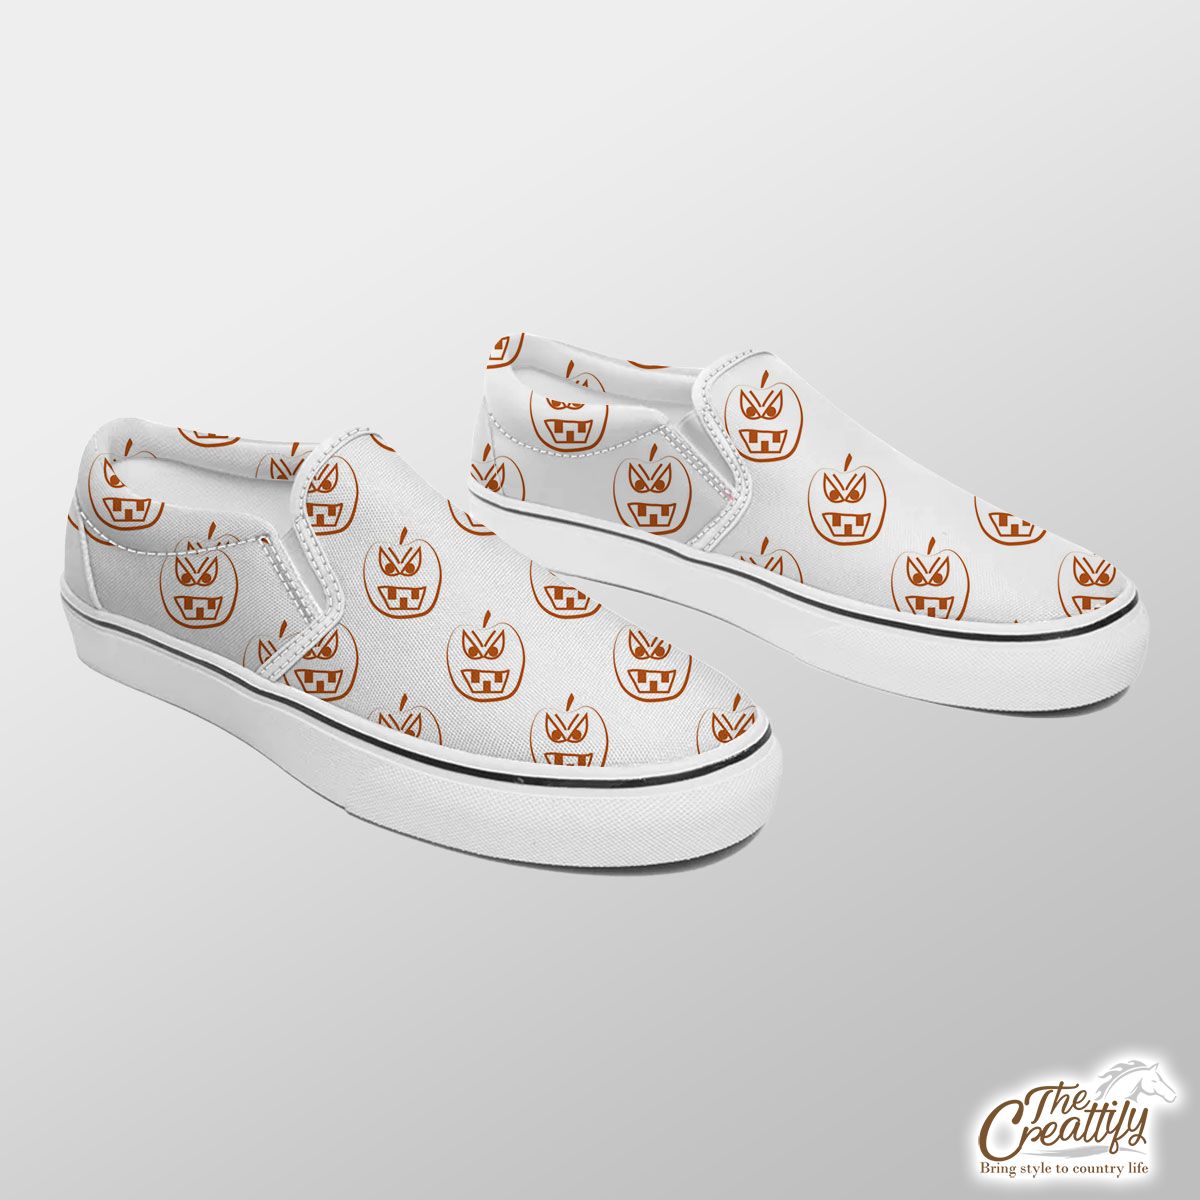 Scary Pumpkin Faces On White Background Halloween Slip On Sneakers